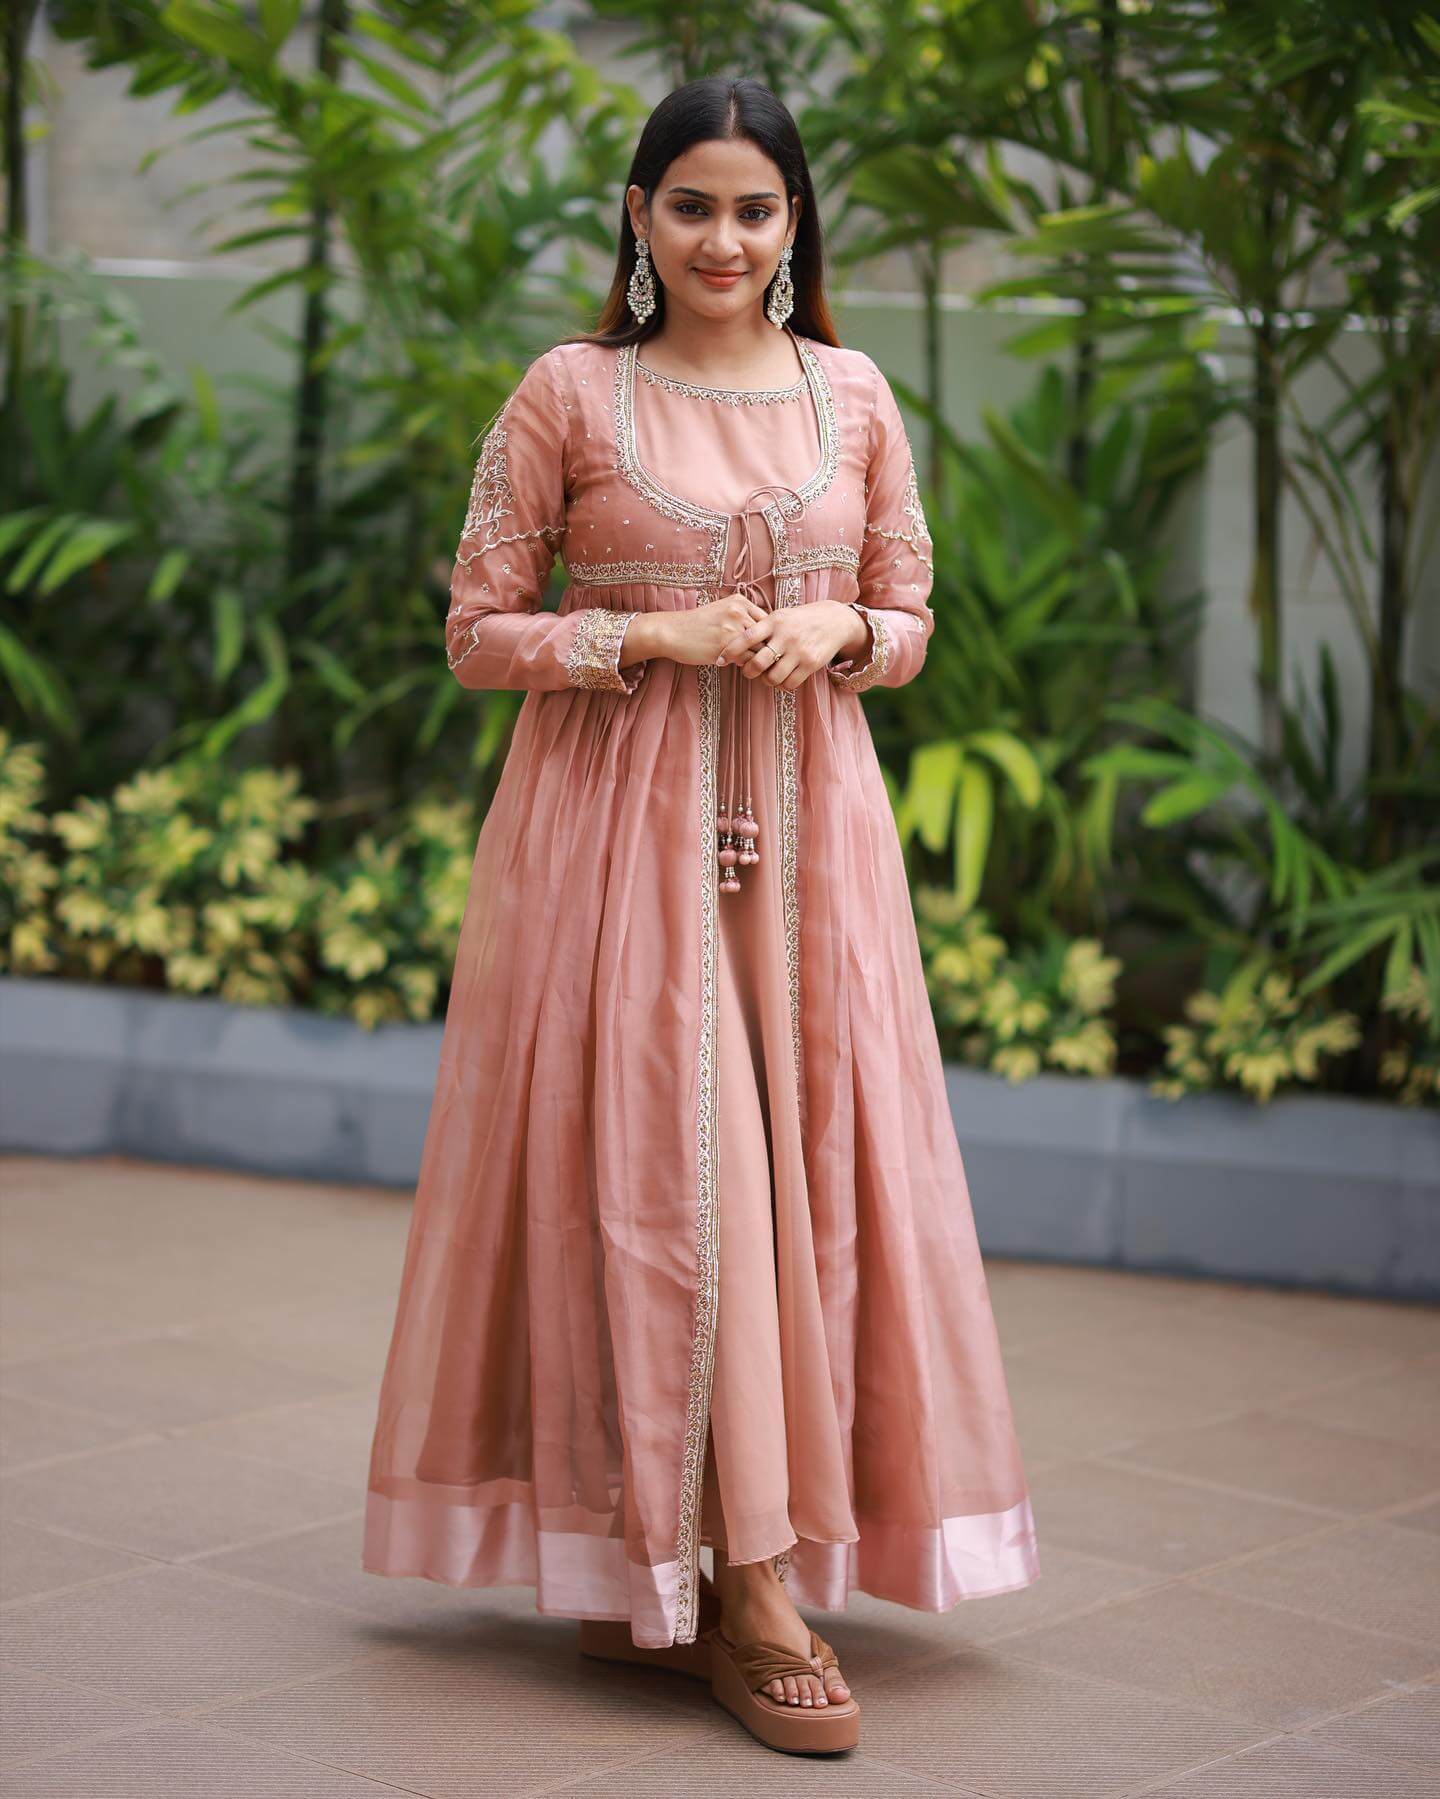 Gorgeous Aditi Ravi In Dusky Pink Kurta Set With Embellished Outer Inspired Best Outfit & Looks Collection